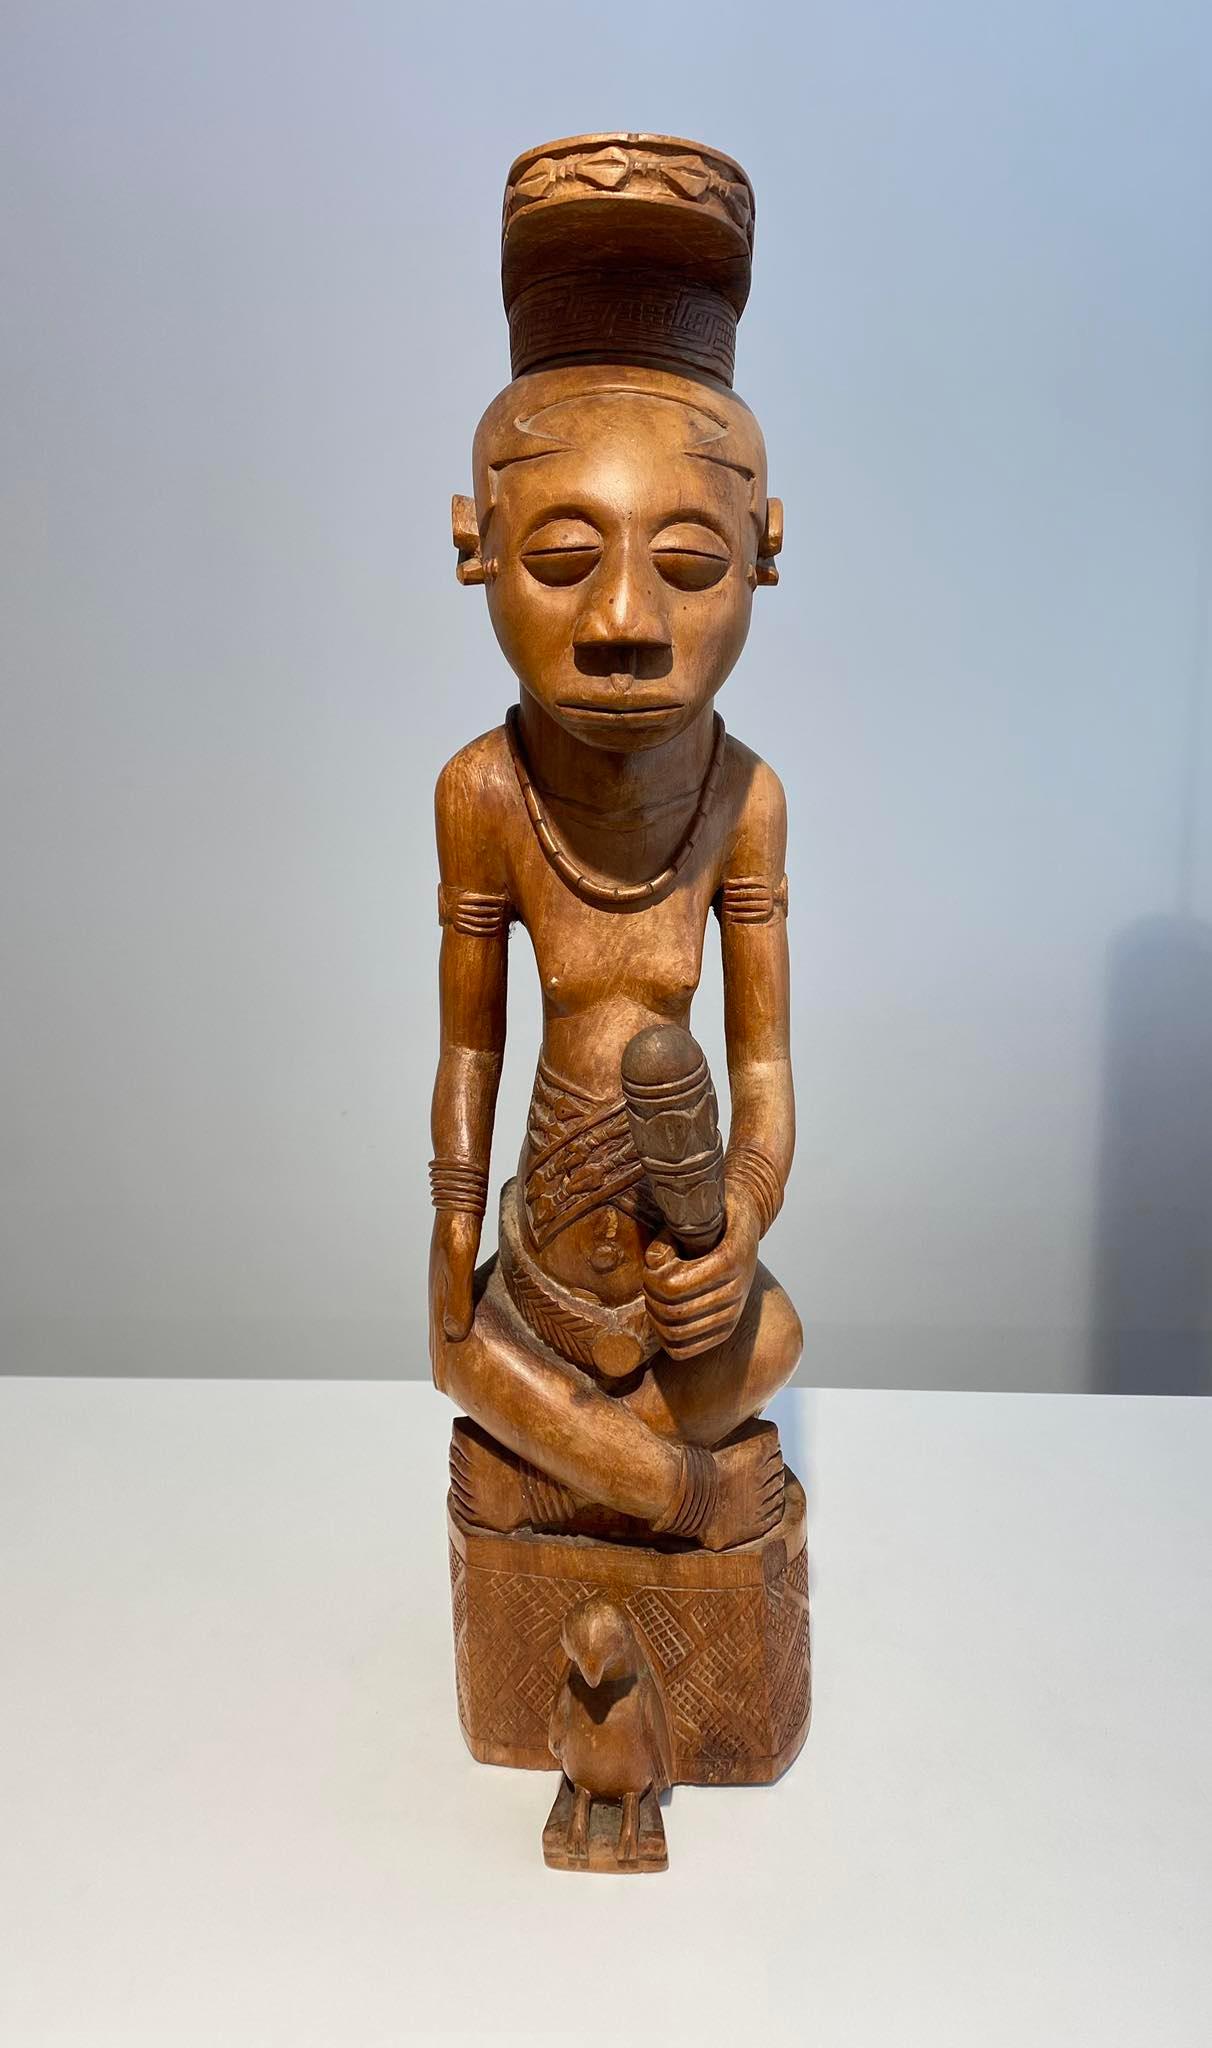 Exceptional royal Ndop statue From the Kuba / Ndengese / Shoowa tribe - DR Congo Kasaï region - Circa 1940-1950
Length = 56 cm
Perfect condition

Note : Image of individual kings
Although the sculptural genre appears naturalistic, ndop are not